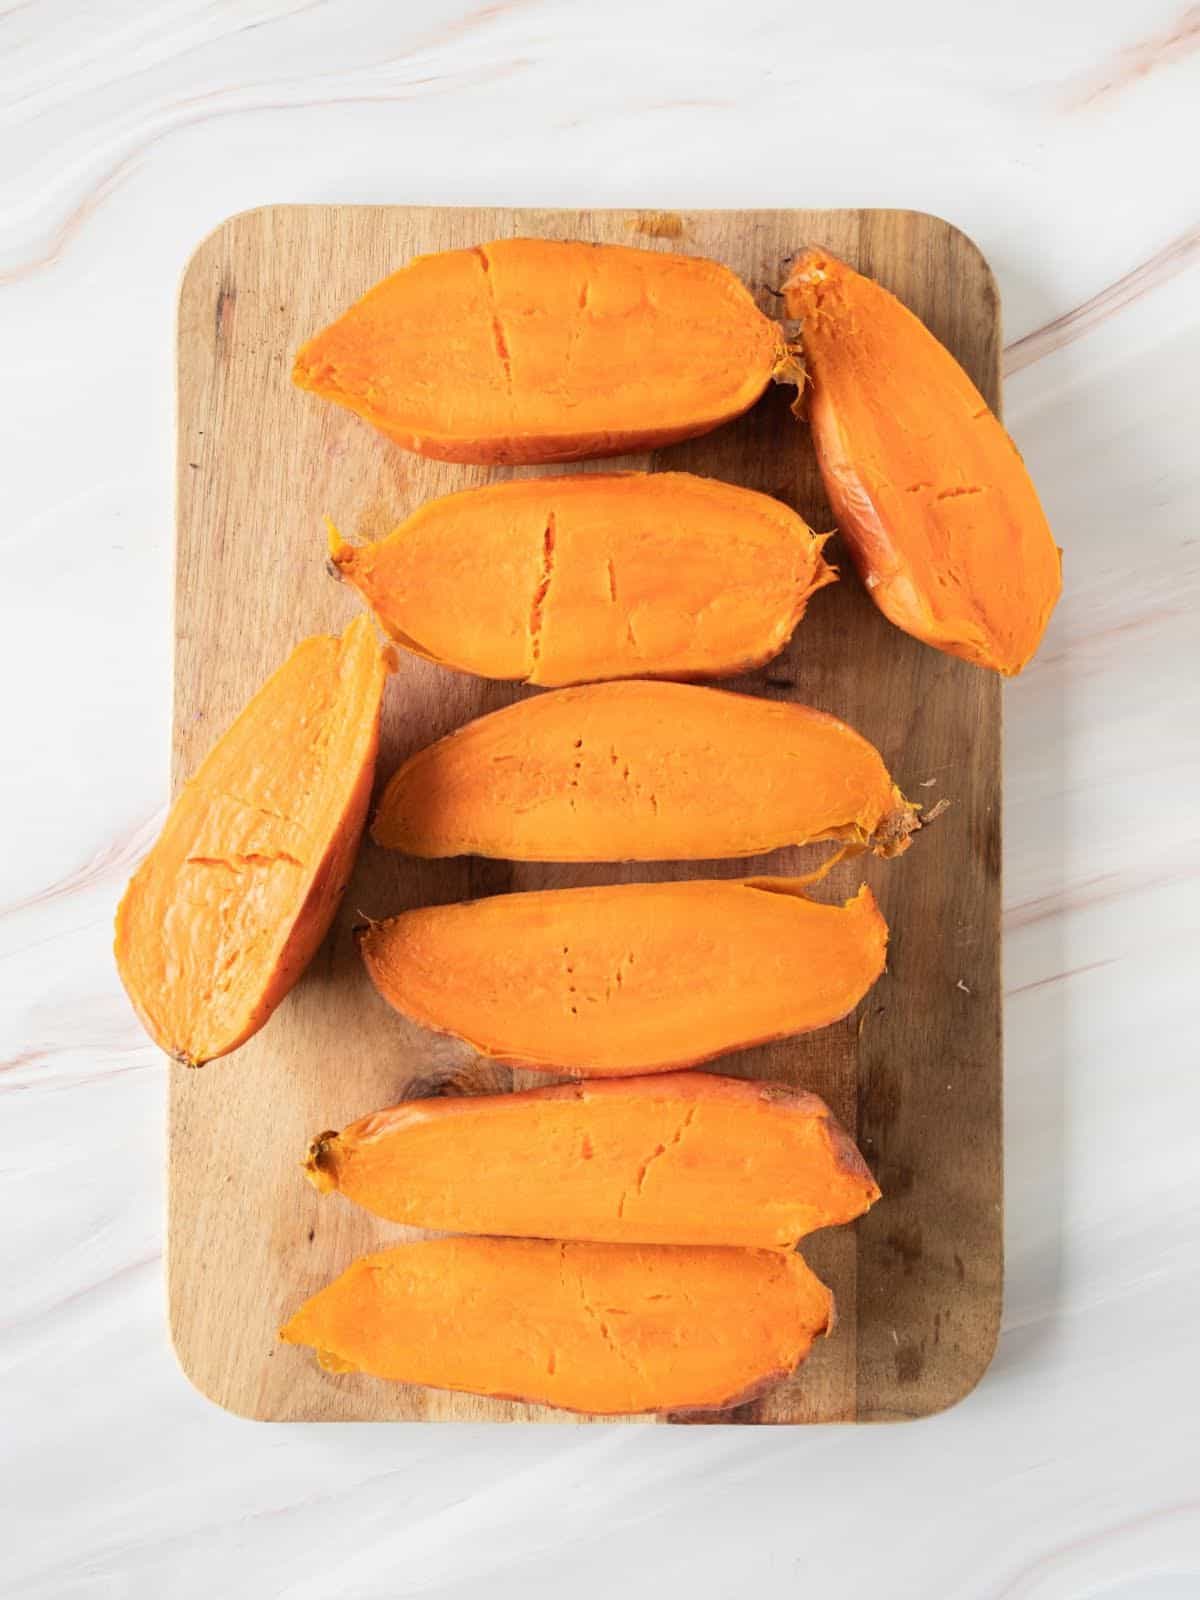 Halved sweet potatoes on a wooden board on a white marbled surface.